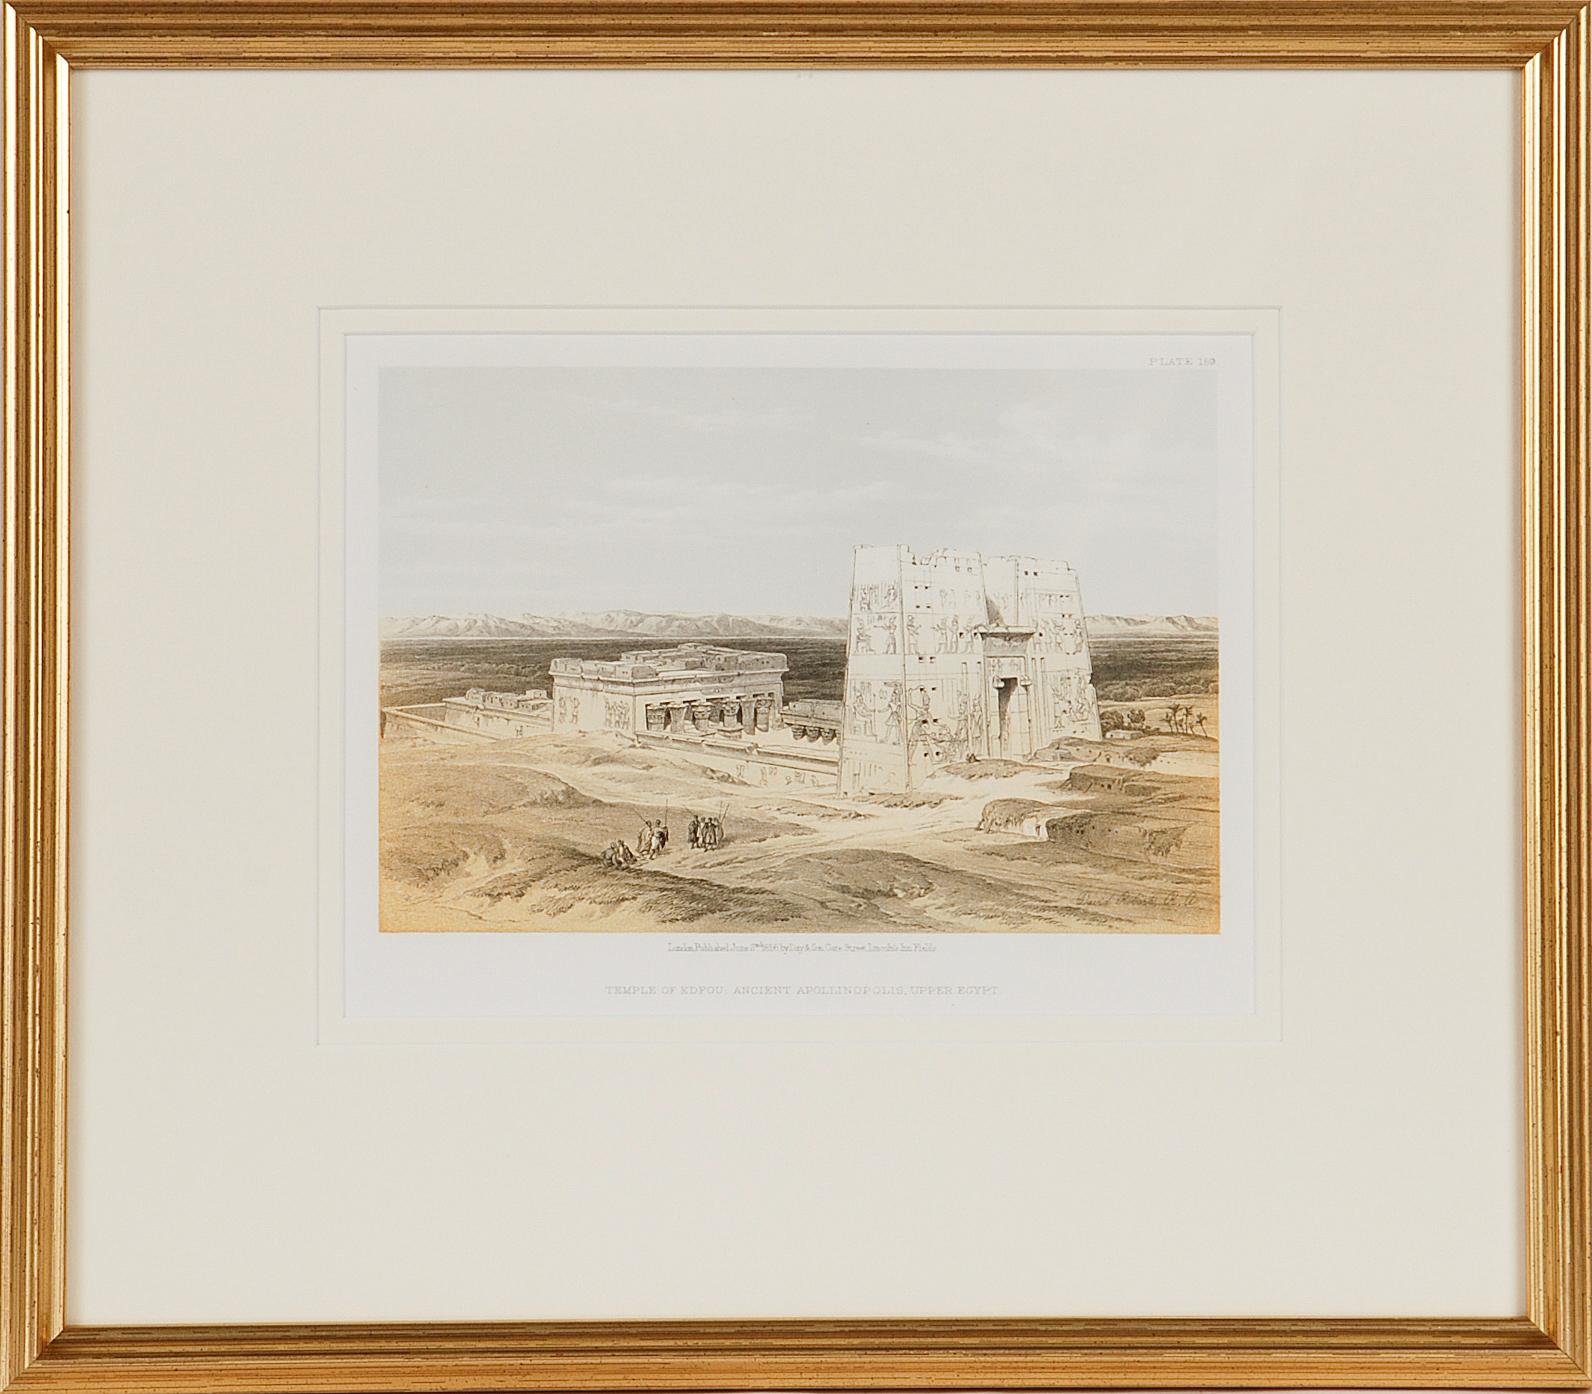 This is an original 19th century duotone lithograph entitled "Temple of Edfou, Ancient Apollinopolis" by David Roberts, from his Egypt, The Holy Land and Nubia volumes of the quarto edition, published in London by Day and Son in 1856. The